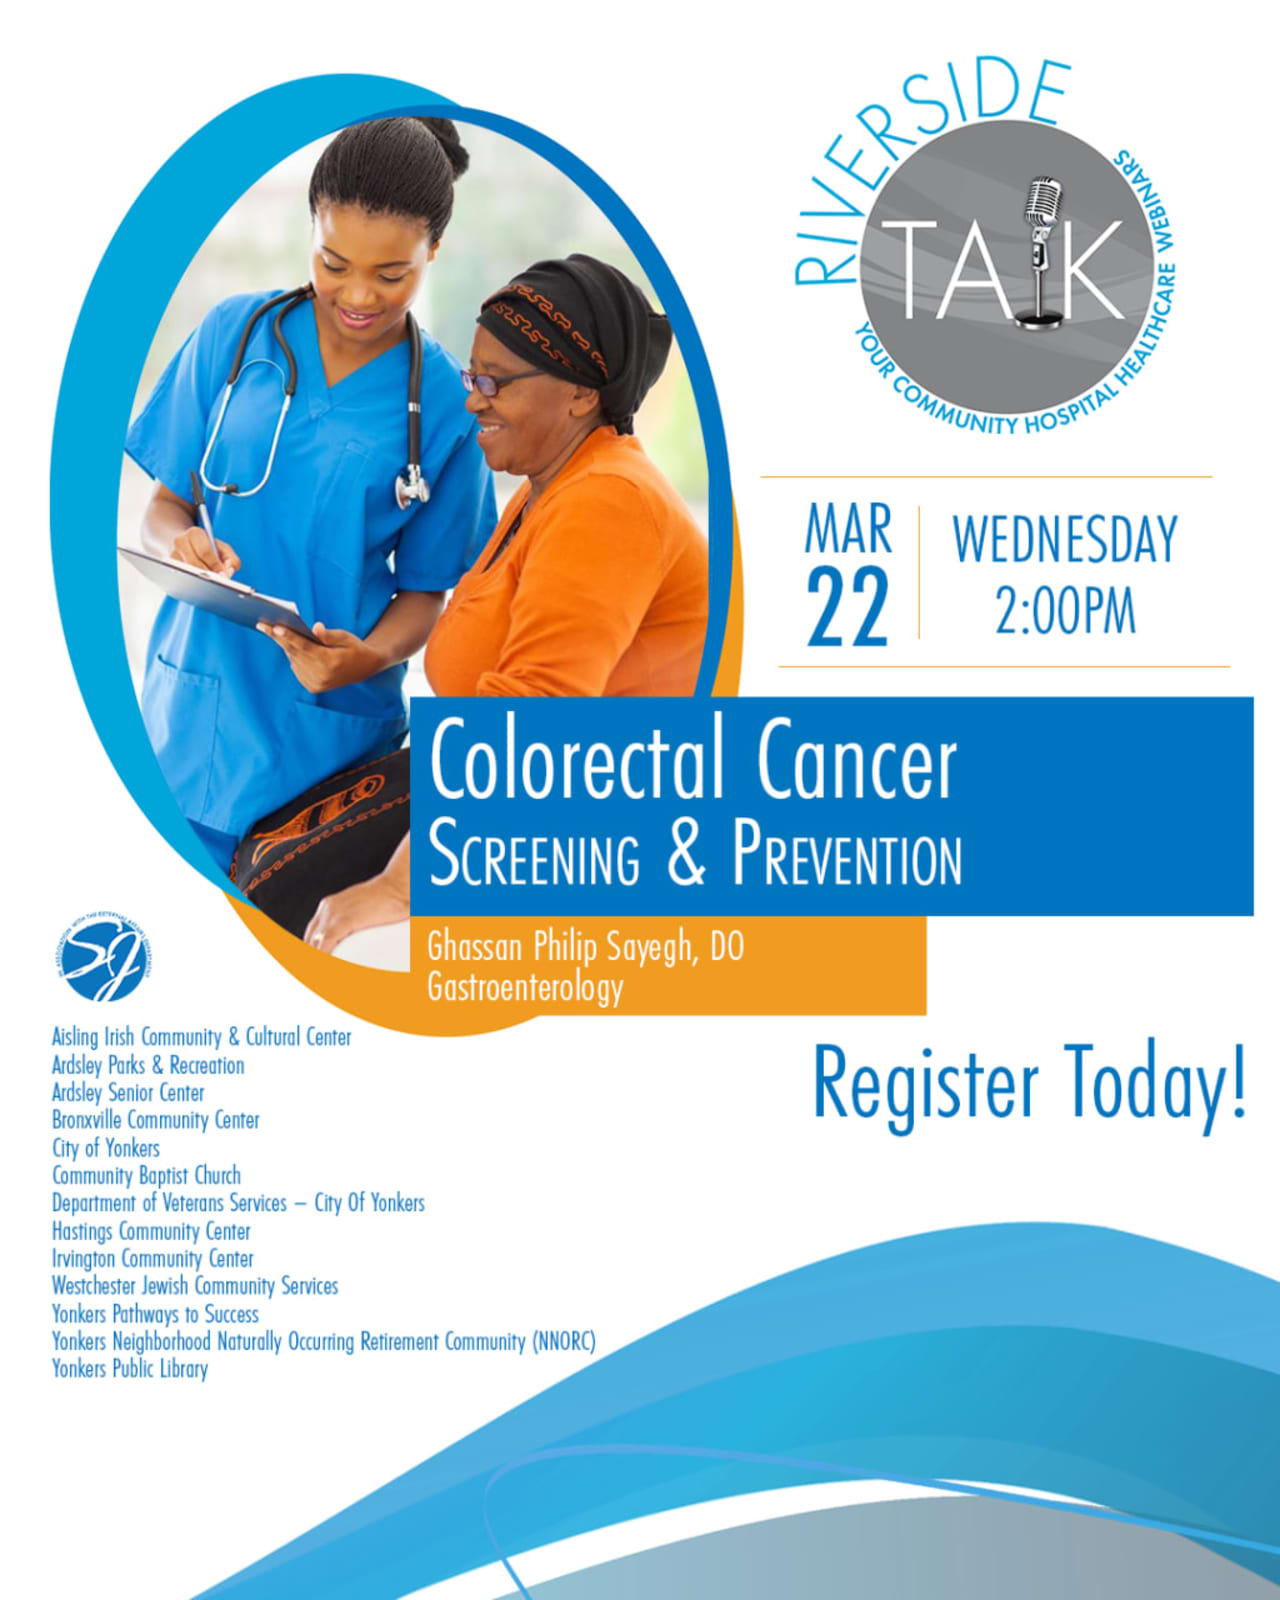 A Colorectal Cancer Screening & Prevention Webinar hosted by St. John’s Riverside Hospital will be held on Wednesday, March 22 at 2pm.